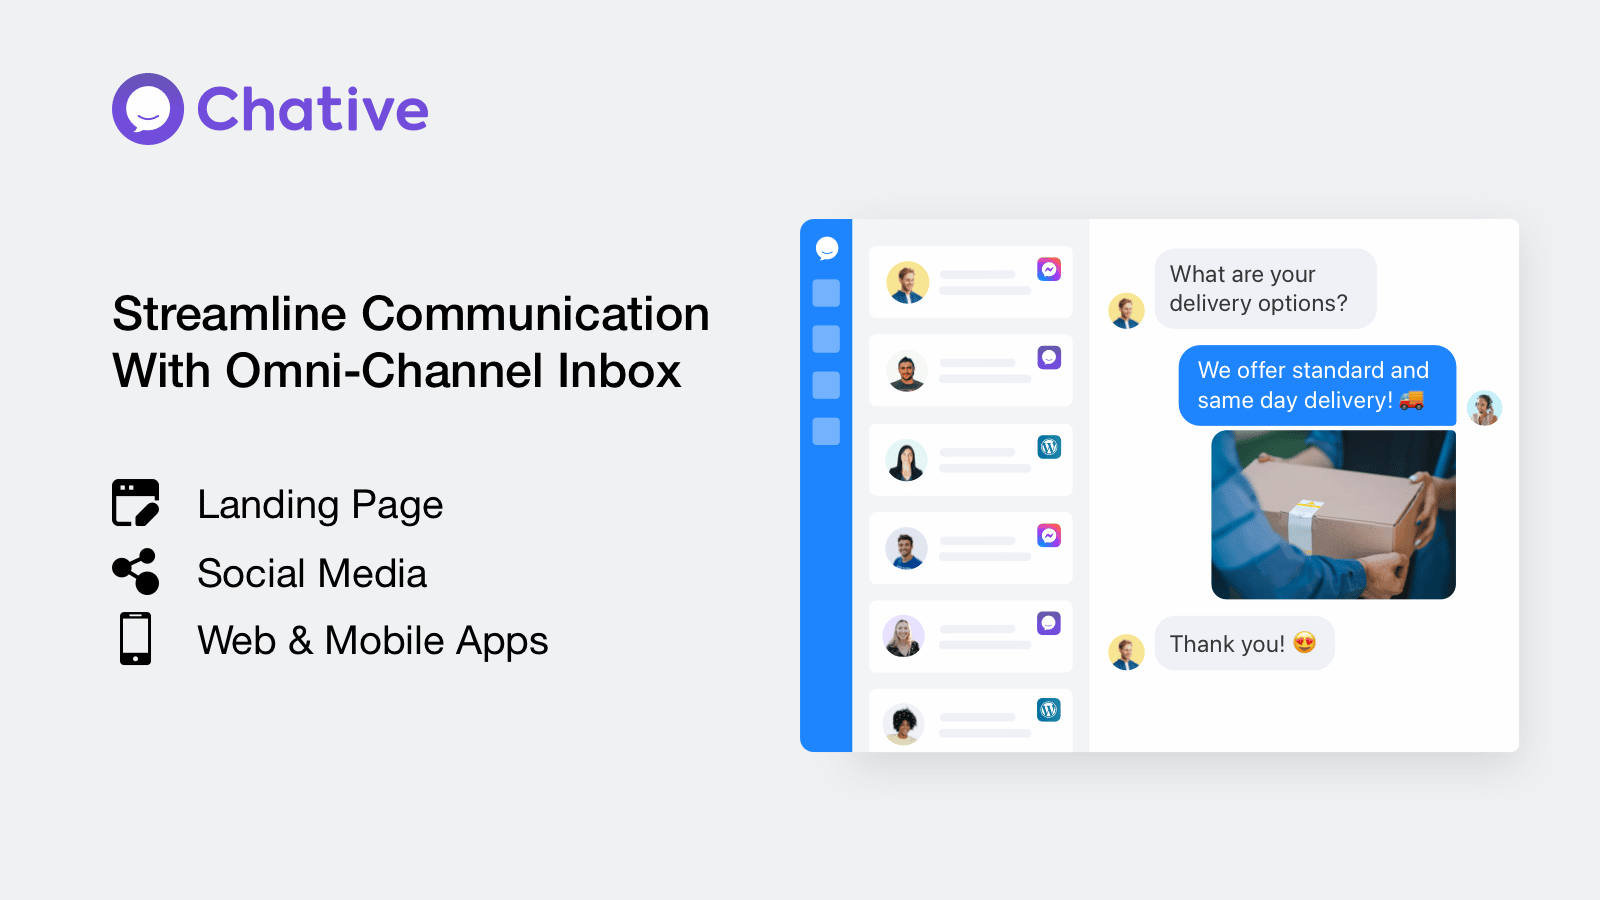 Chative ‑ Live chat & Chatbot